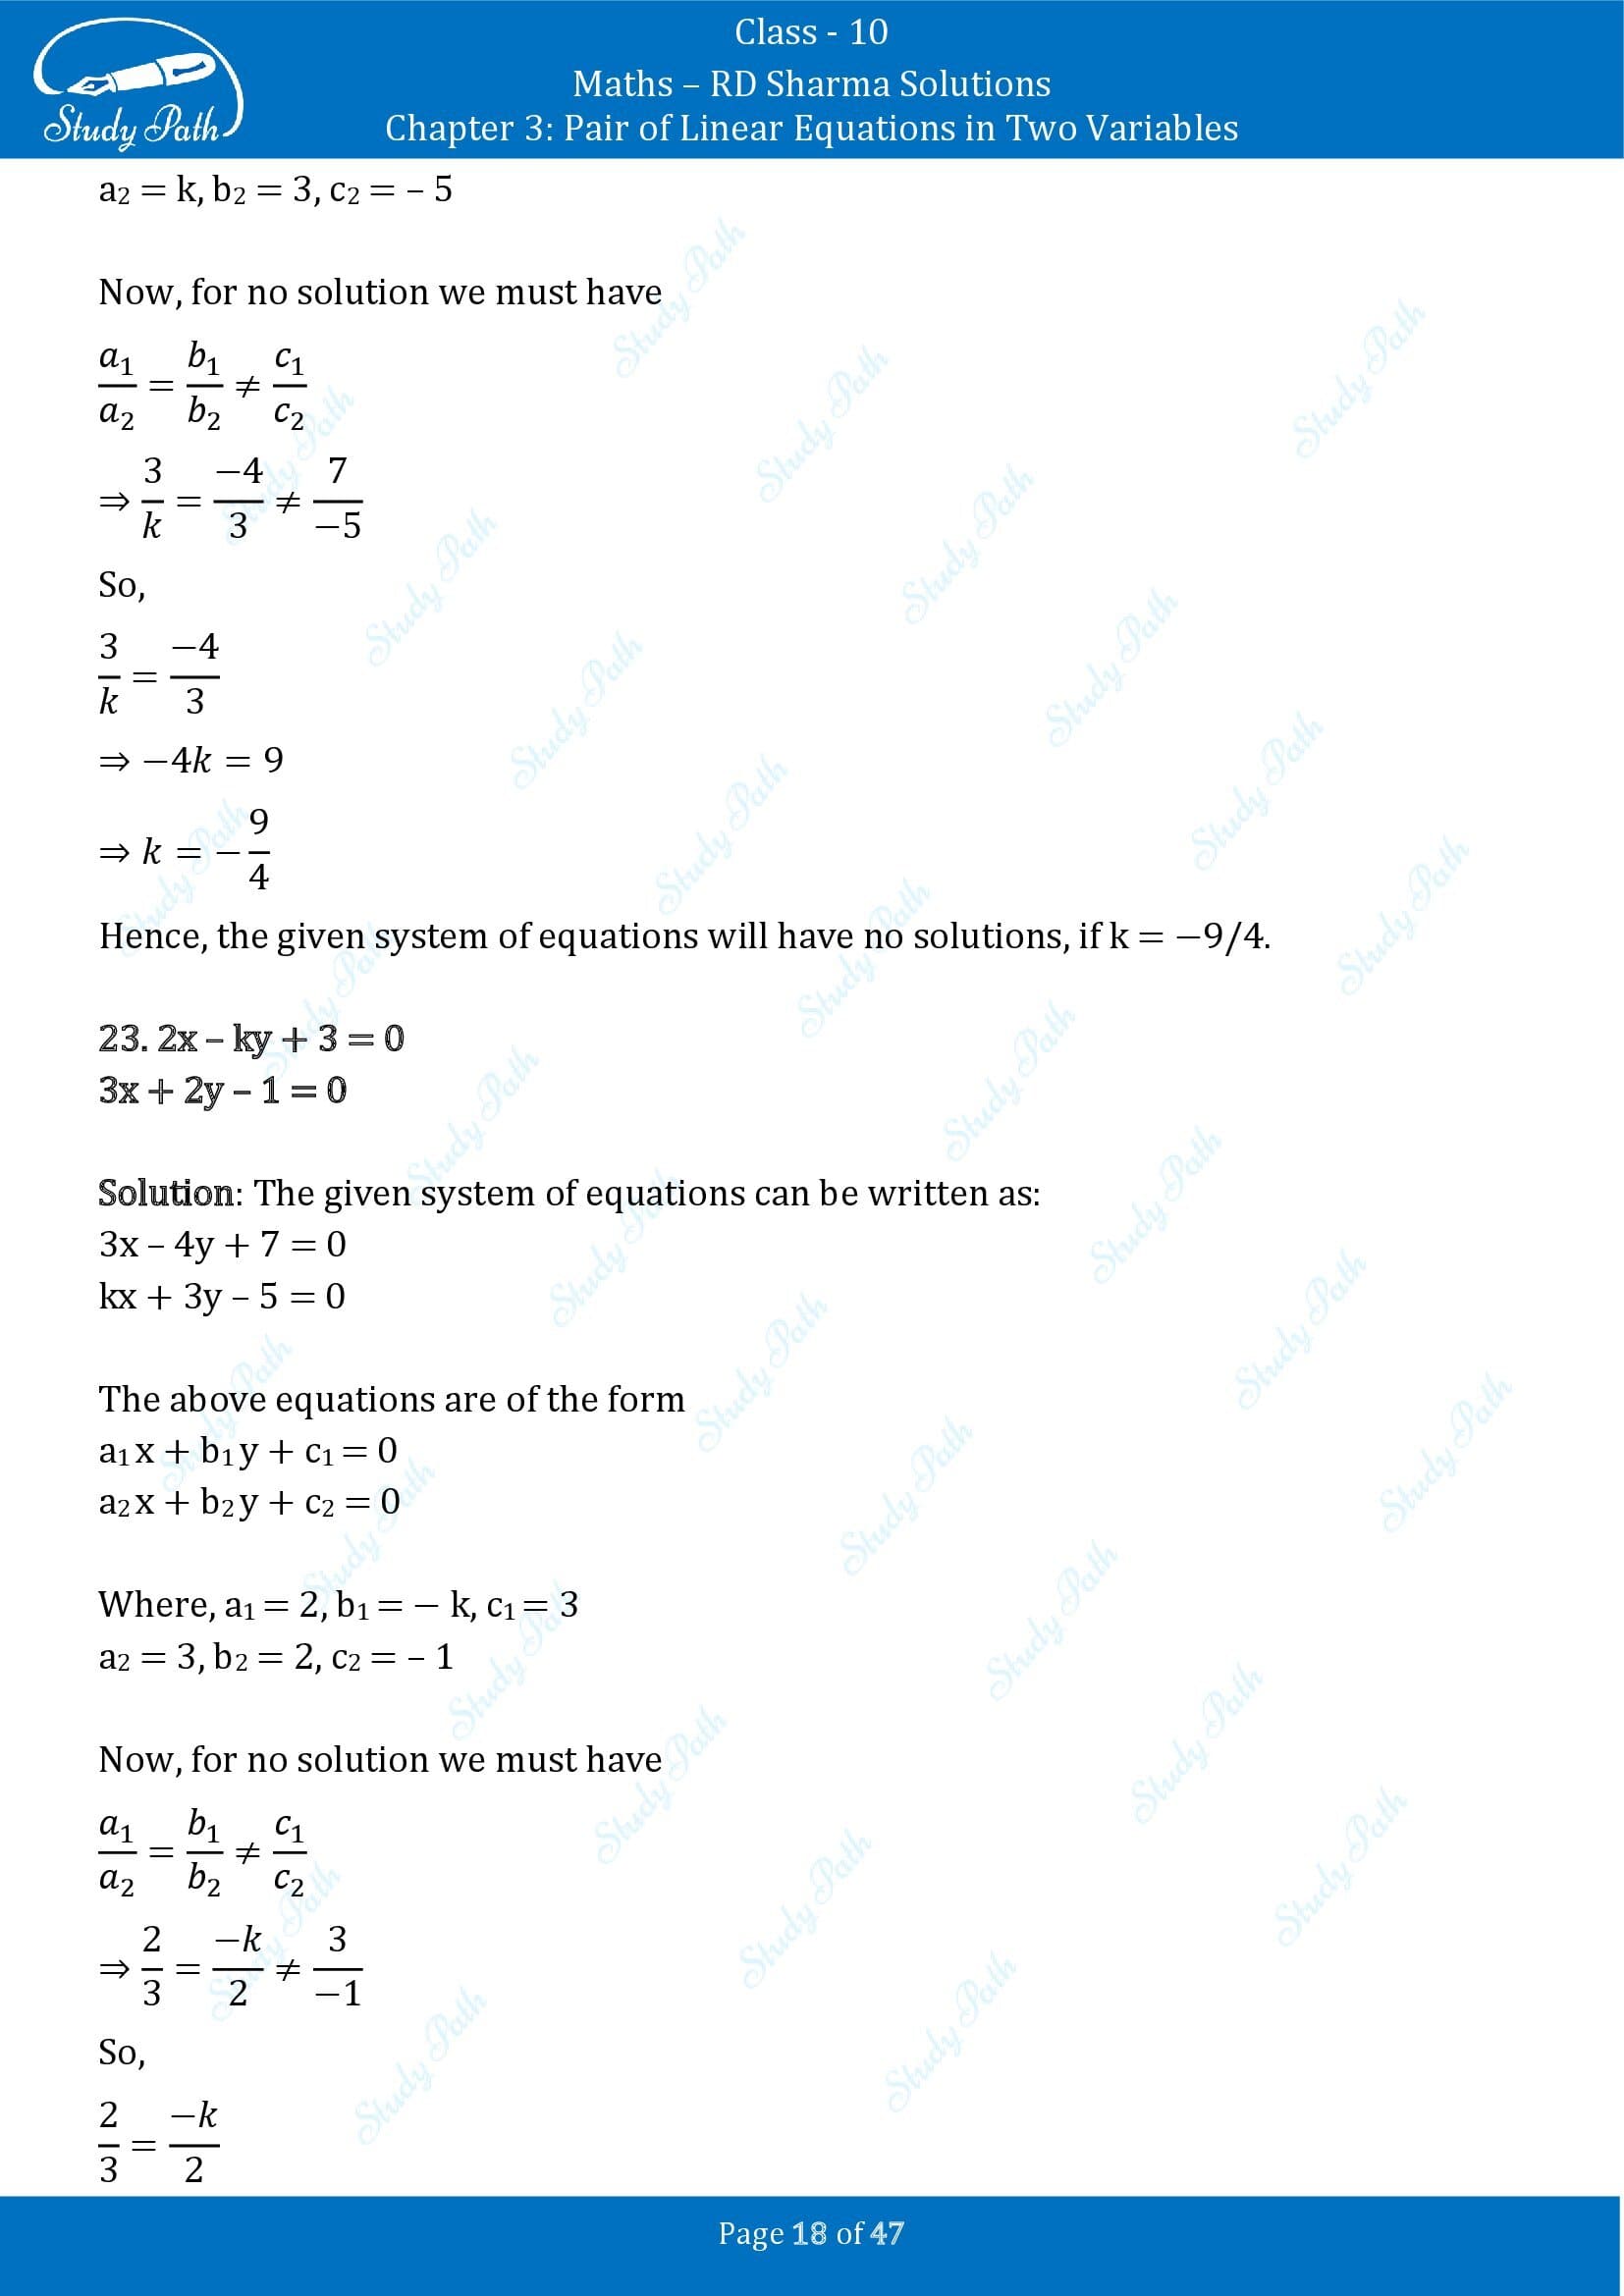 RD Sharma Solutions Class 10 Chapter 3 Pair of Linear Equations in Two Variables Exercise 3.5 00018